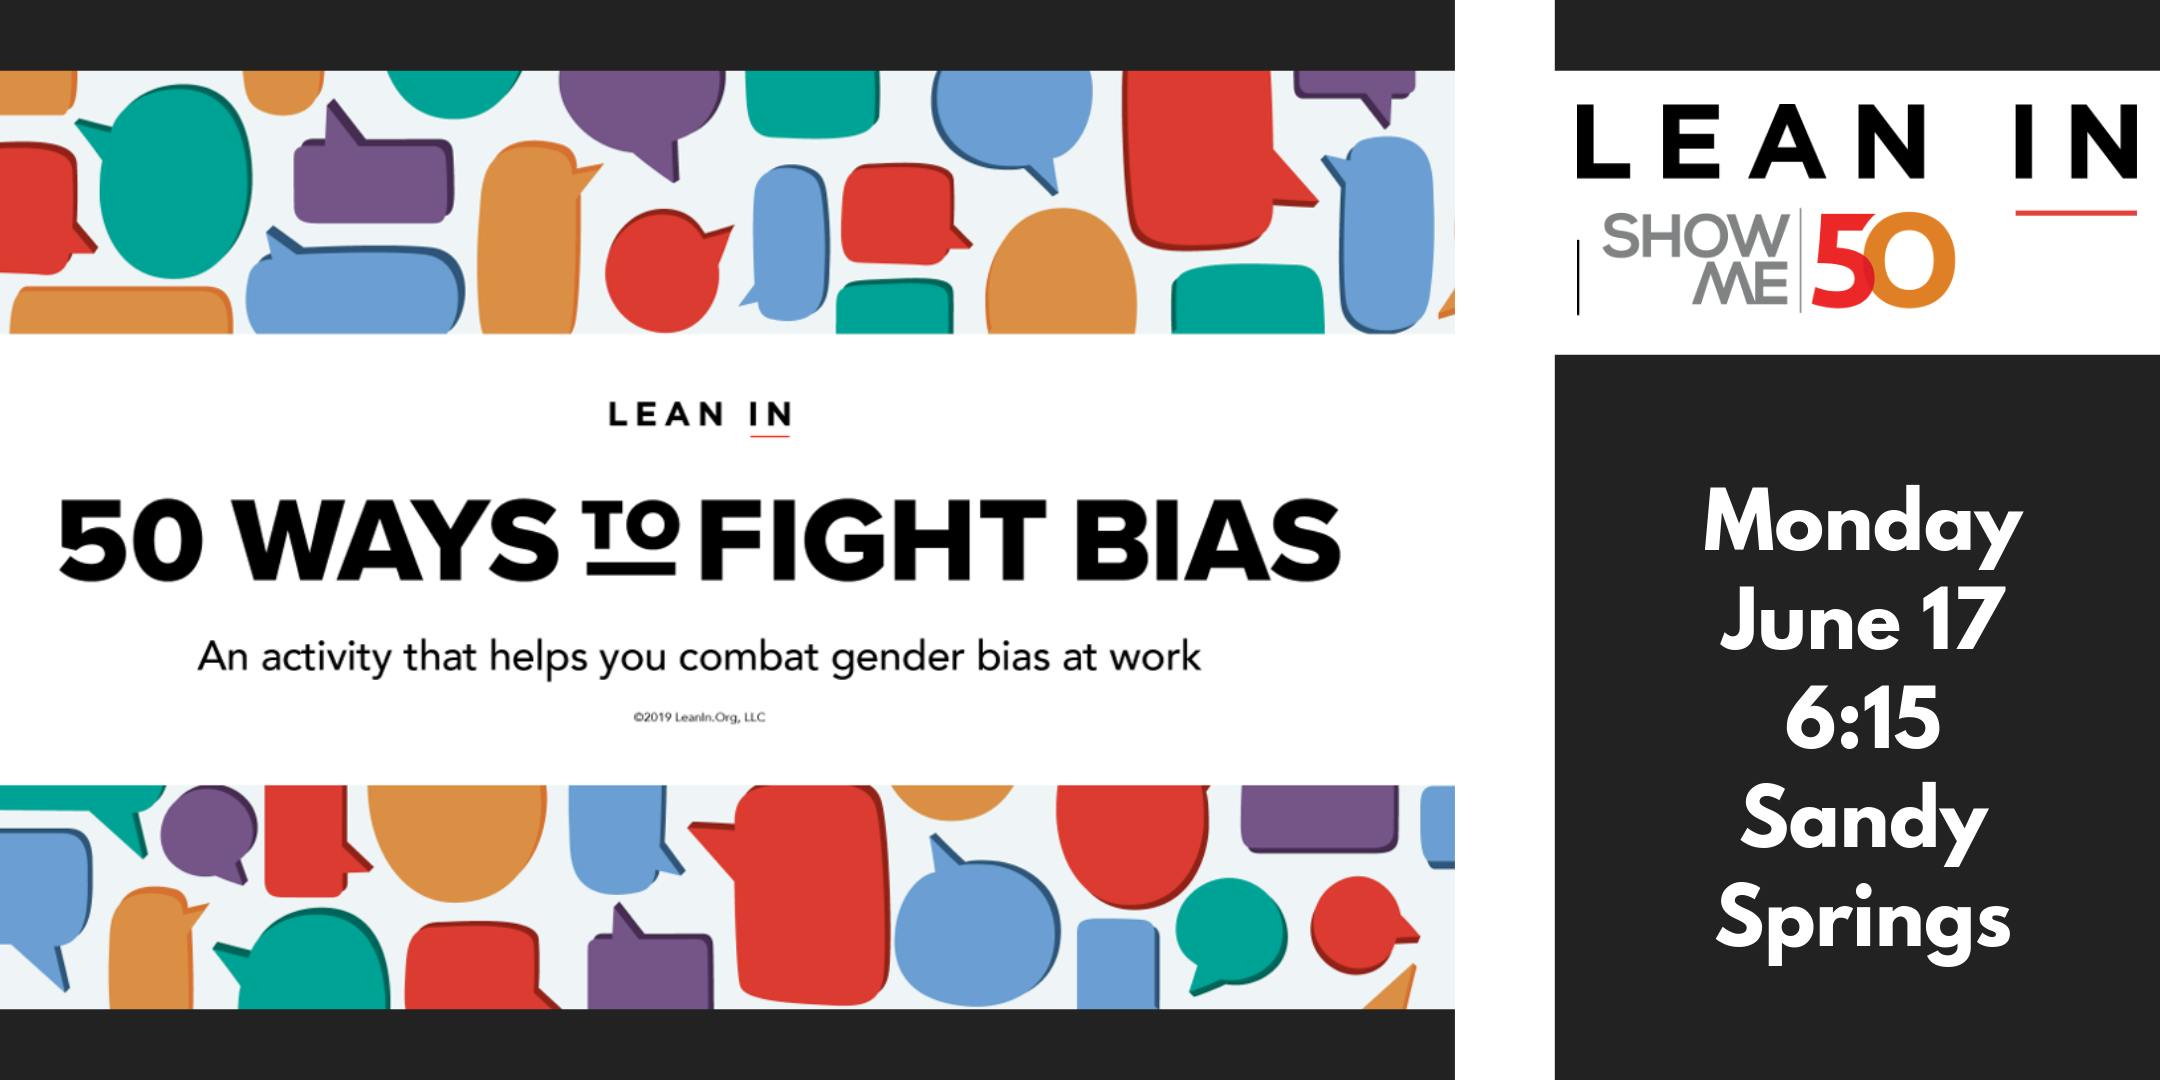 ShowMe50 Lean In Circle: Experiential Workshop 50 Ways to Fight Bias